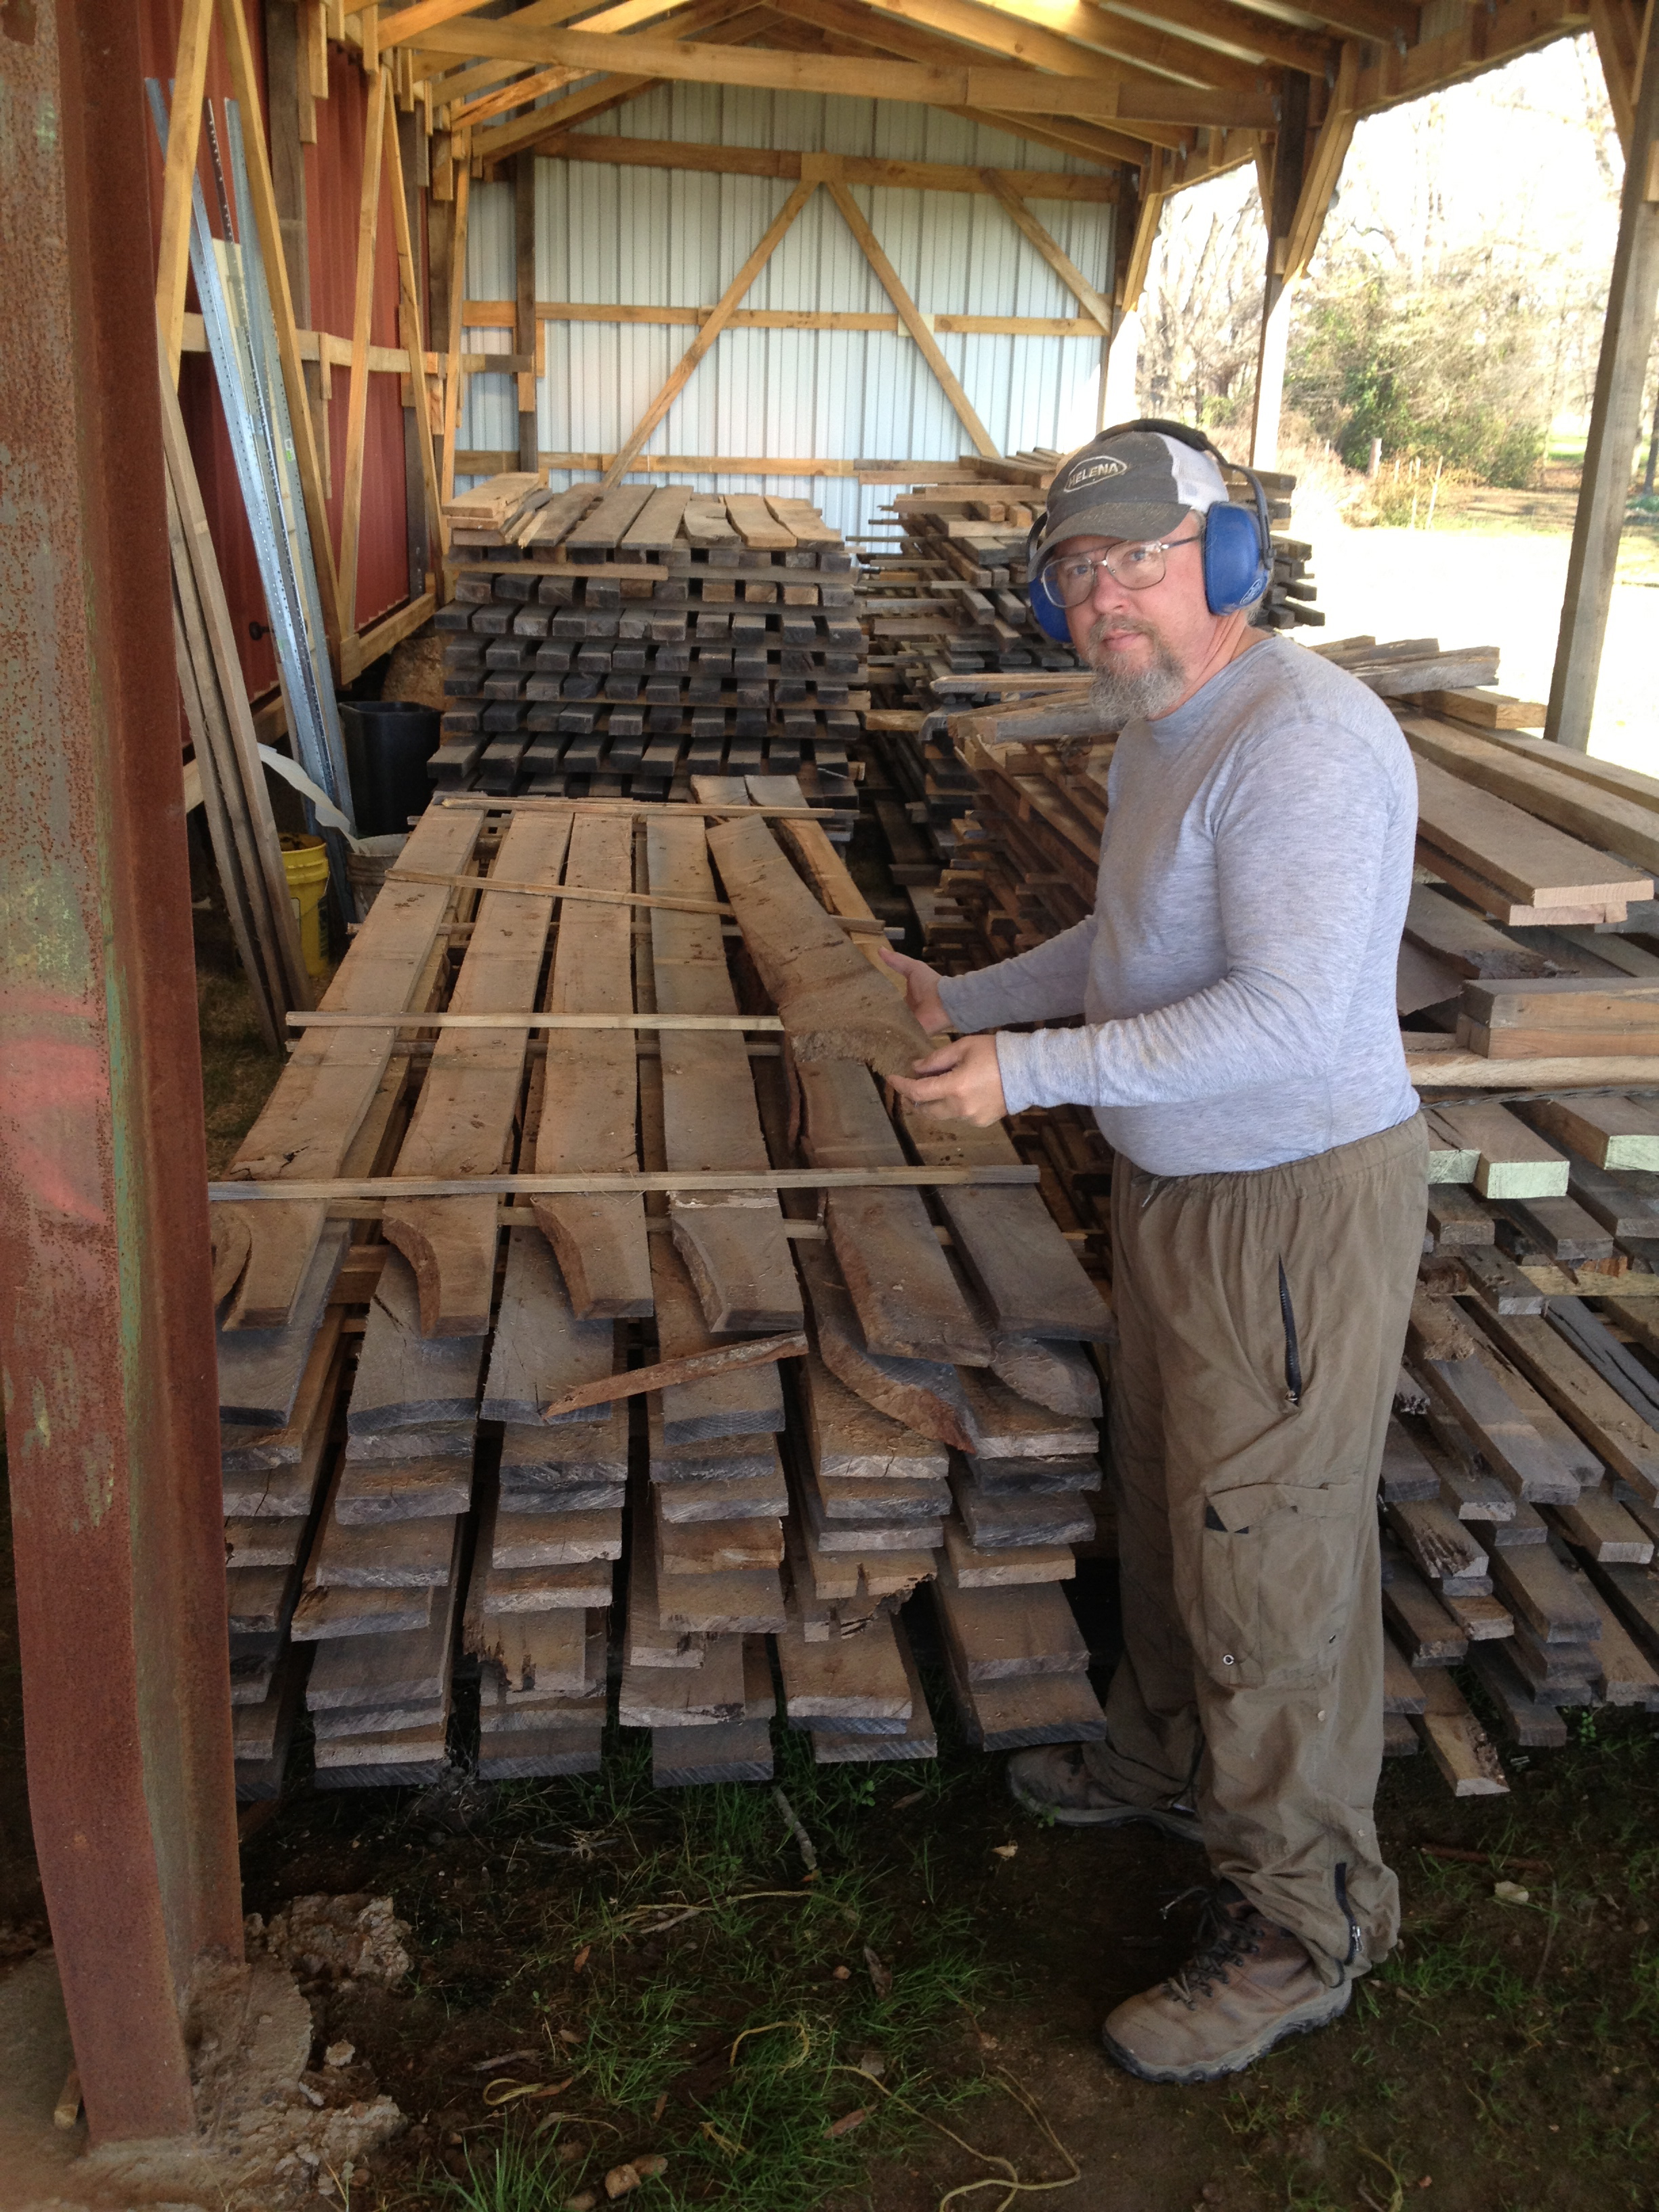 Kendall shows oak lumber stored in the drying shed.